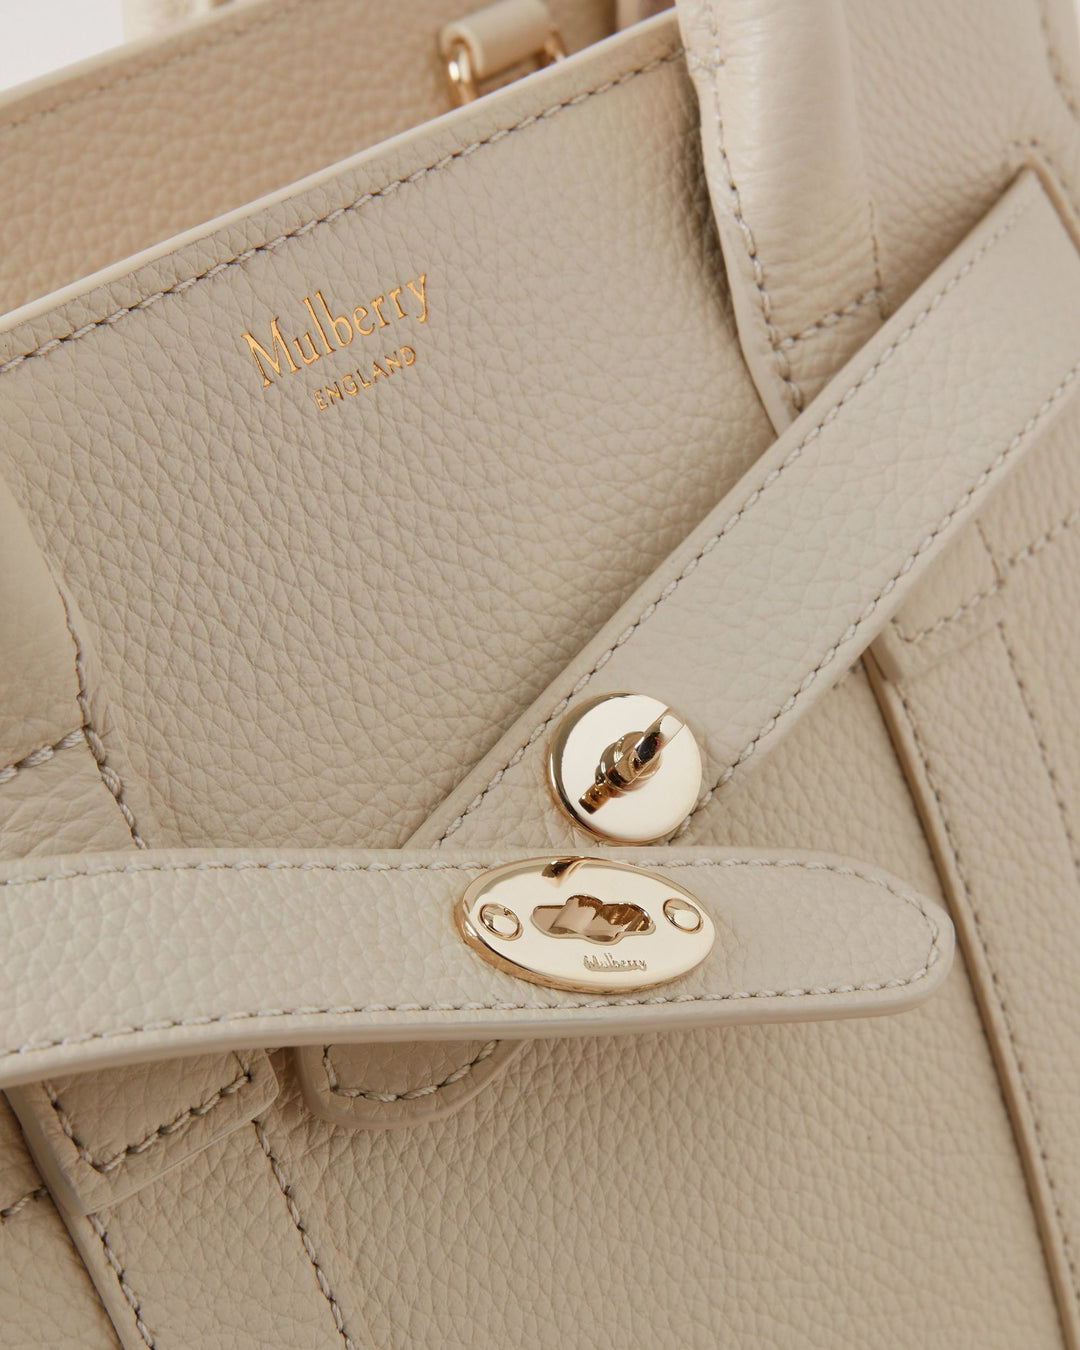 Mulberry-Mini-Zipped-Bayswater-Shoulder-Bag-Small-Classic-Grain-Off-White-5